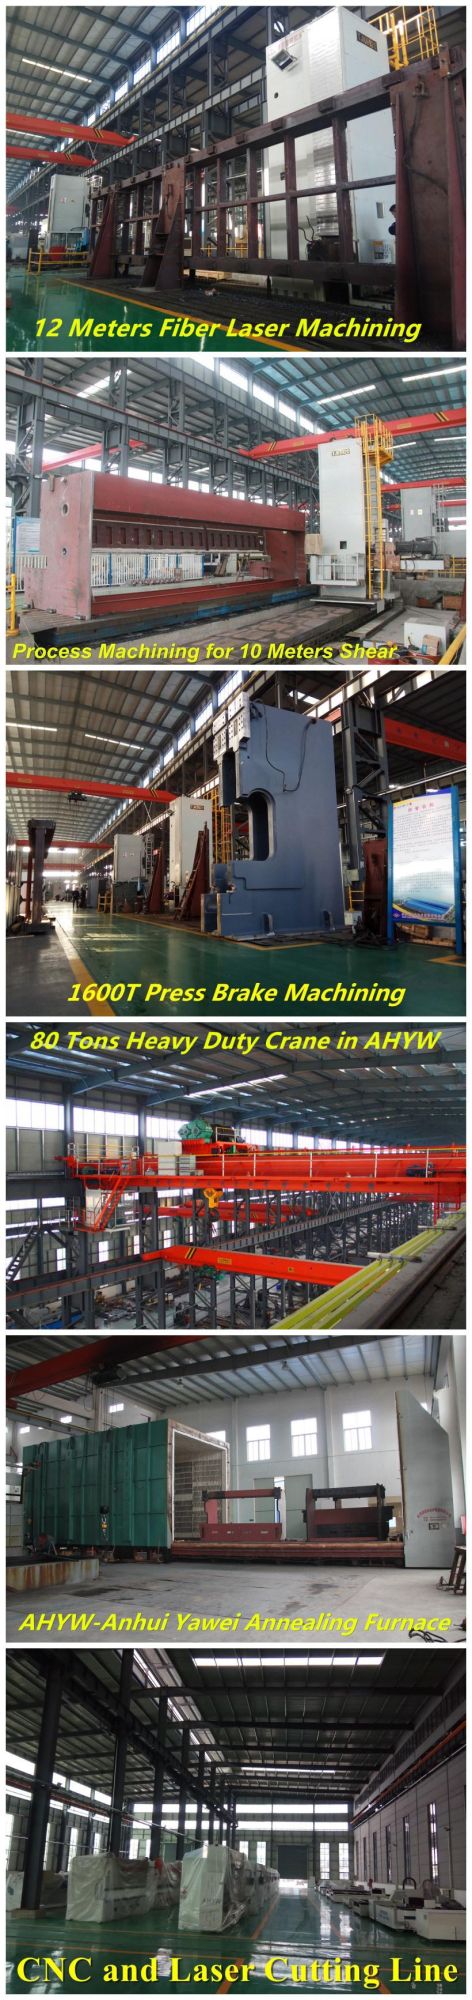 Metal Guillotine Machine for Sale From Anhui Yawei with Ahyw Logo for Metal Sheet Cutting